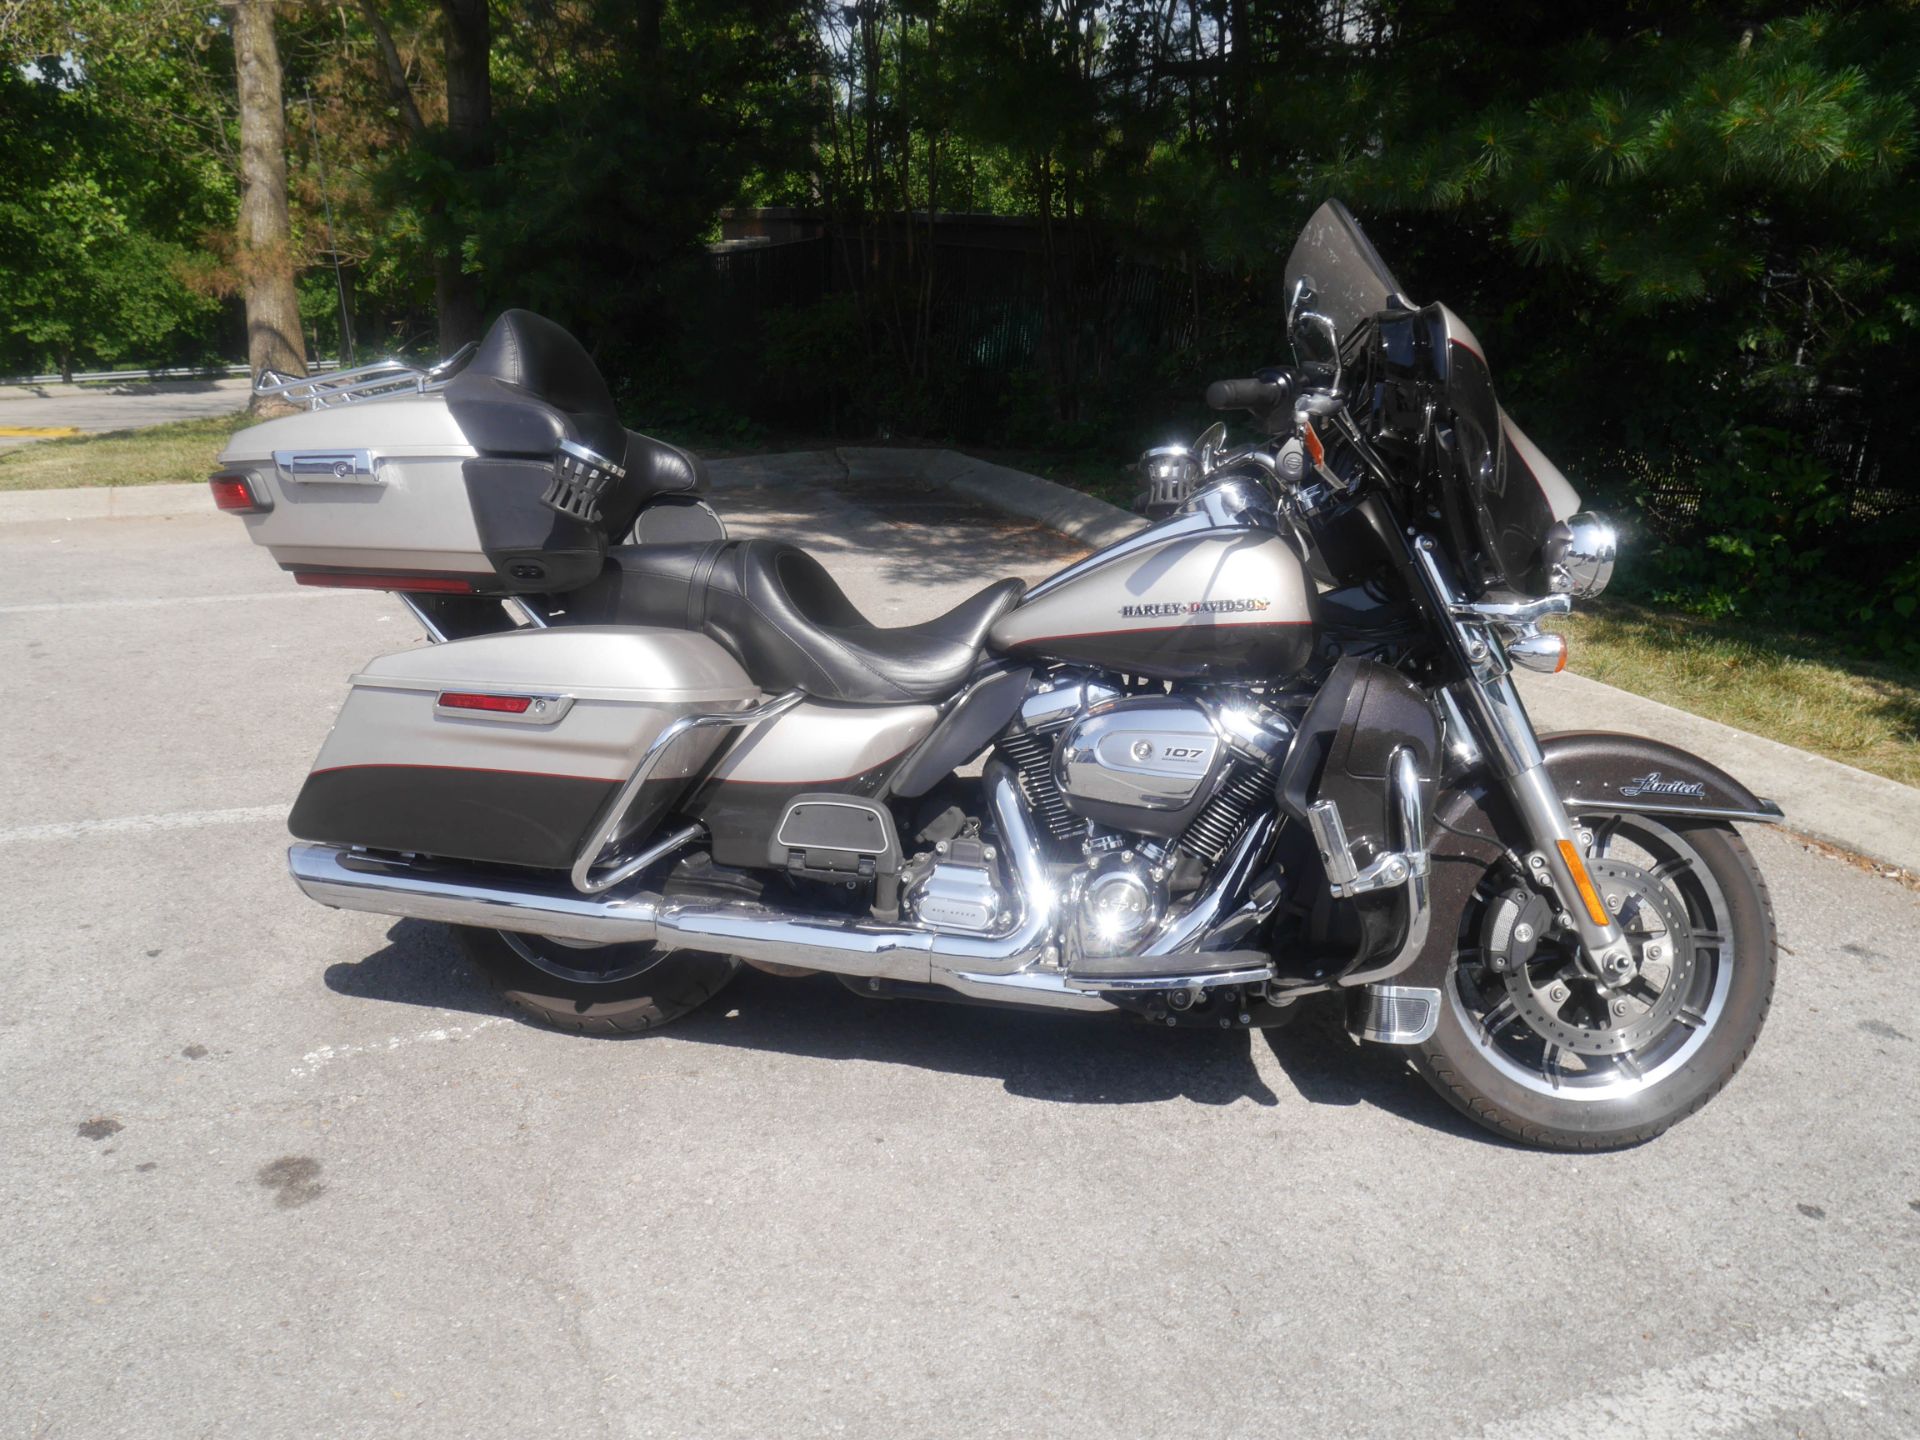 2018 Harley-Davidson Ultra Limited in Franklin, Tennessee - Photo 10